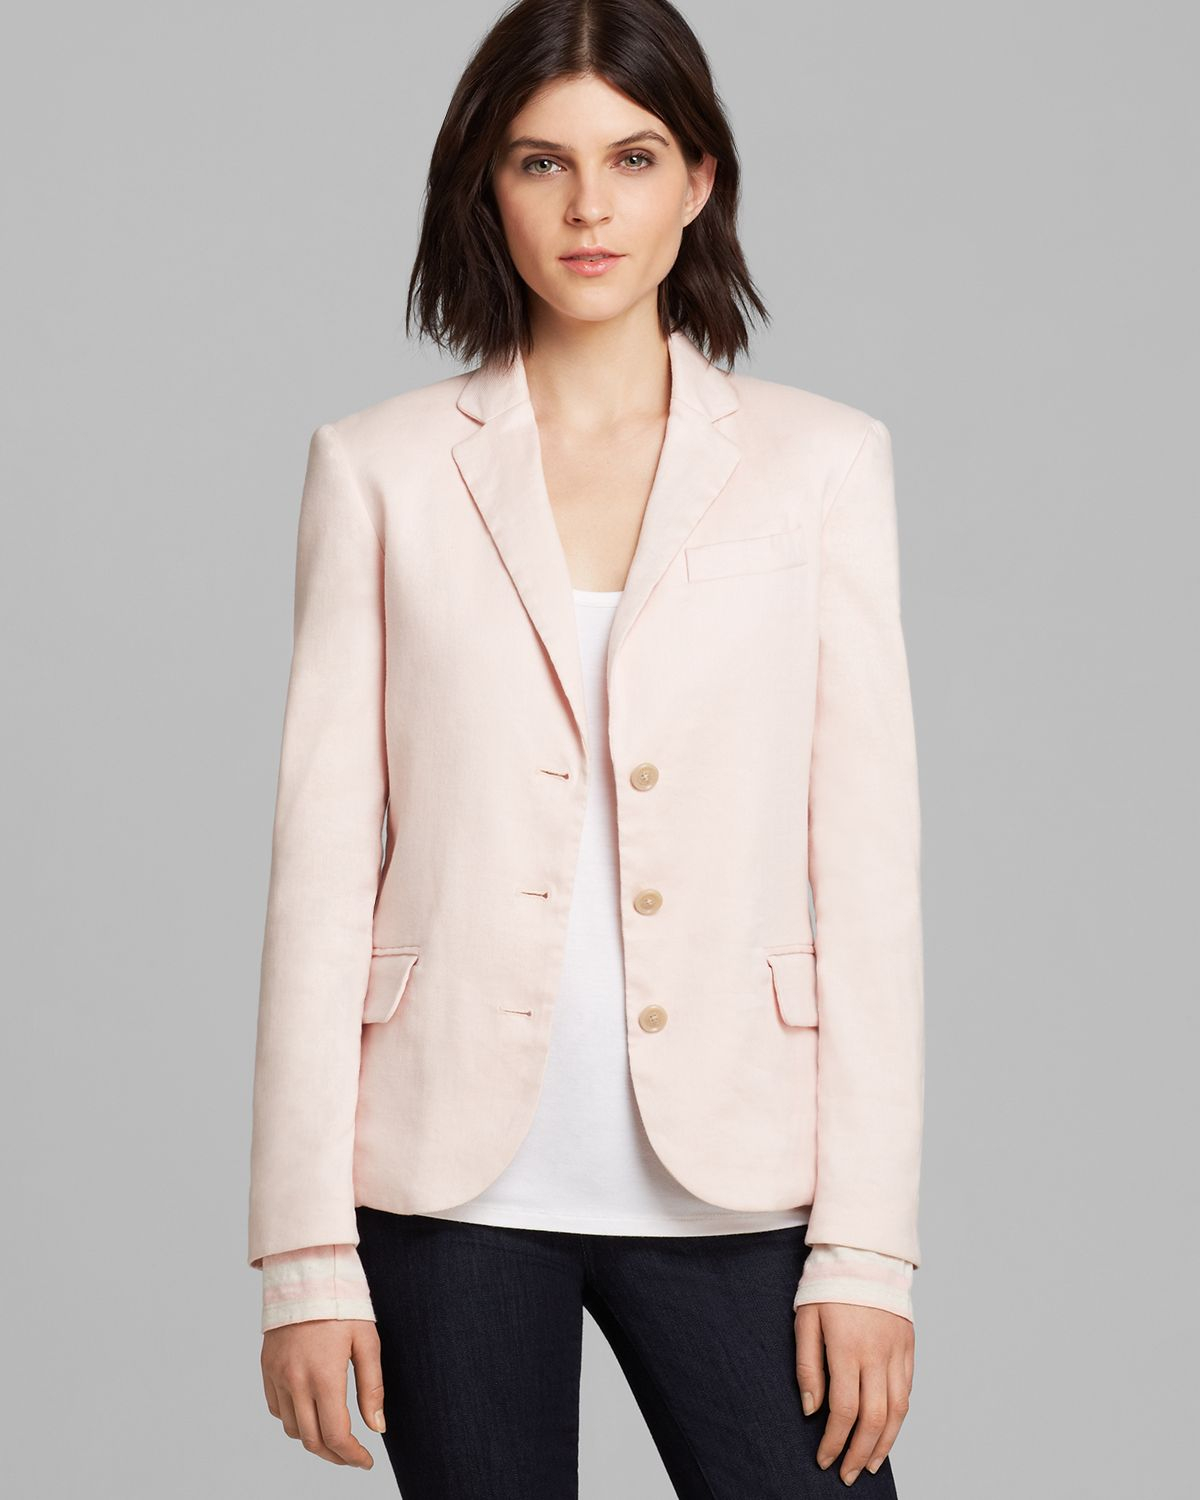 Lyst - Marc By Marc Jacobs Blazer Twill in Natural